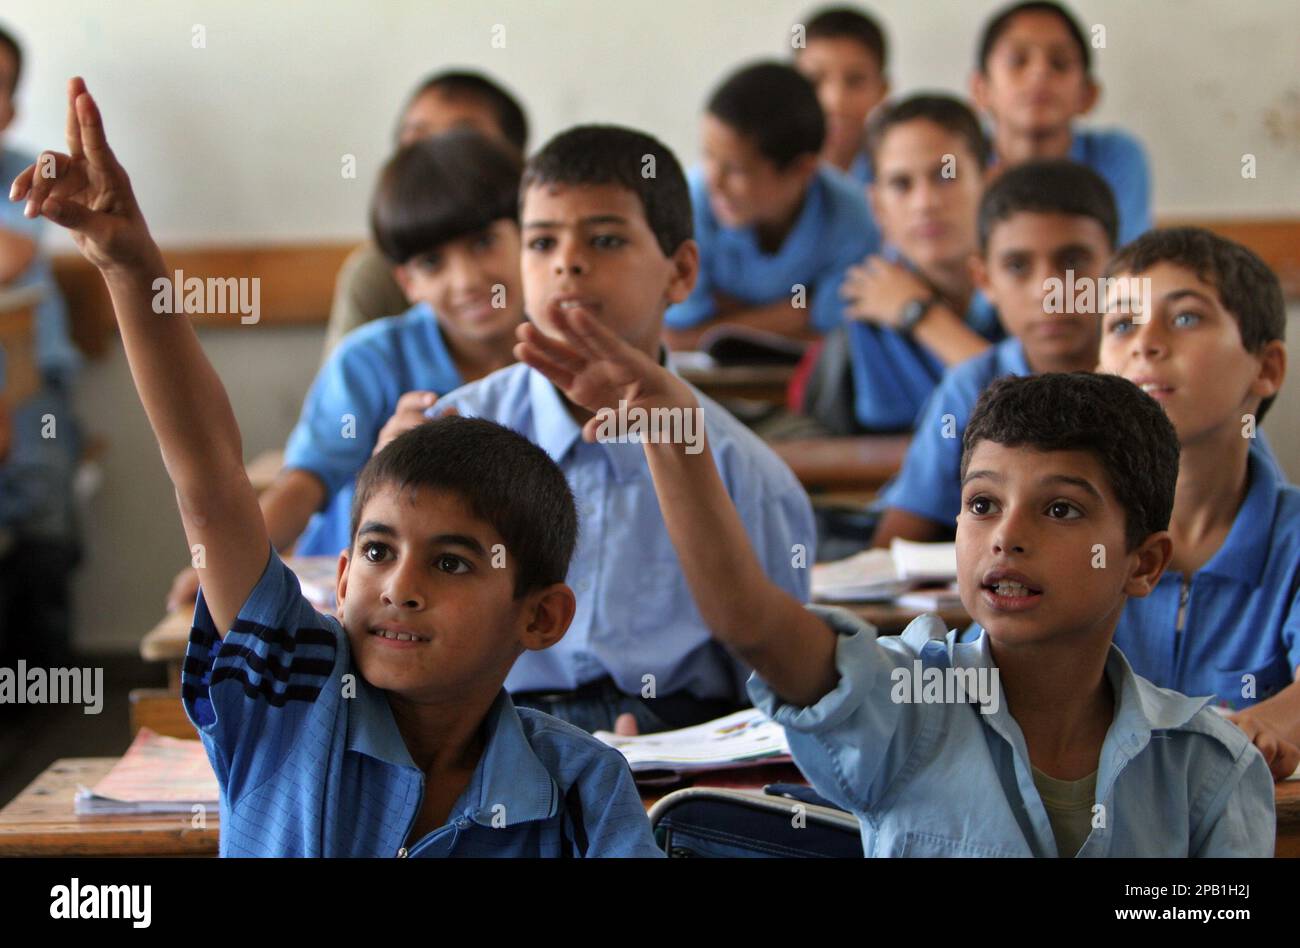 embargoed-until-22-00-gmt-thursday-palestinian-children-attend-classes-at-a-united-nations